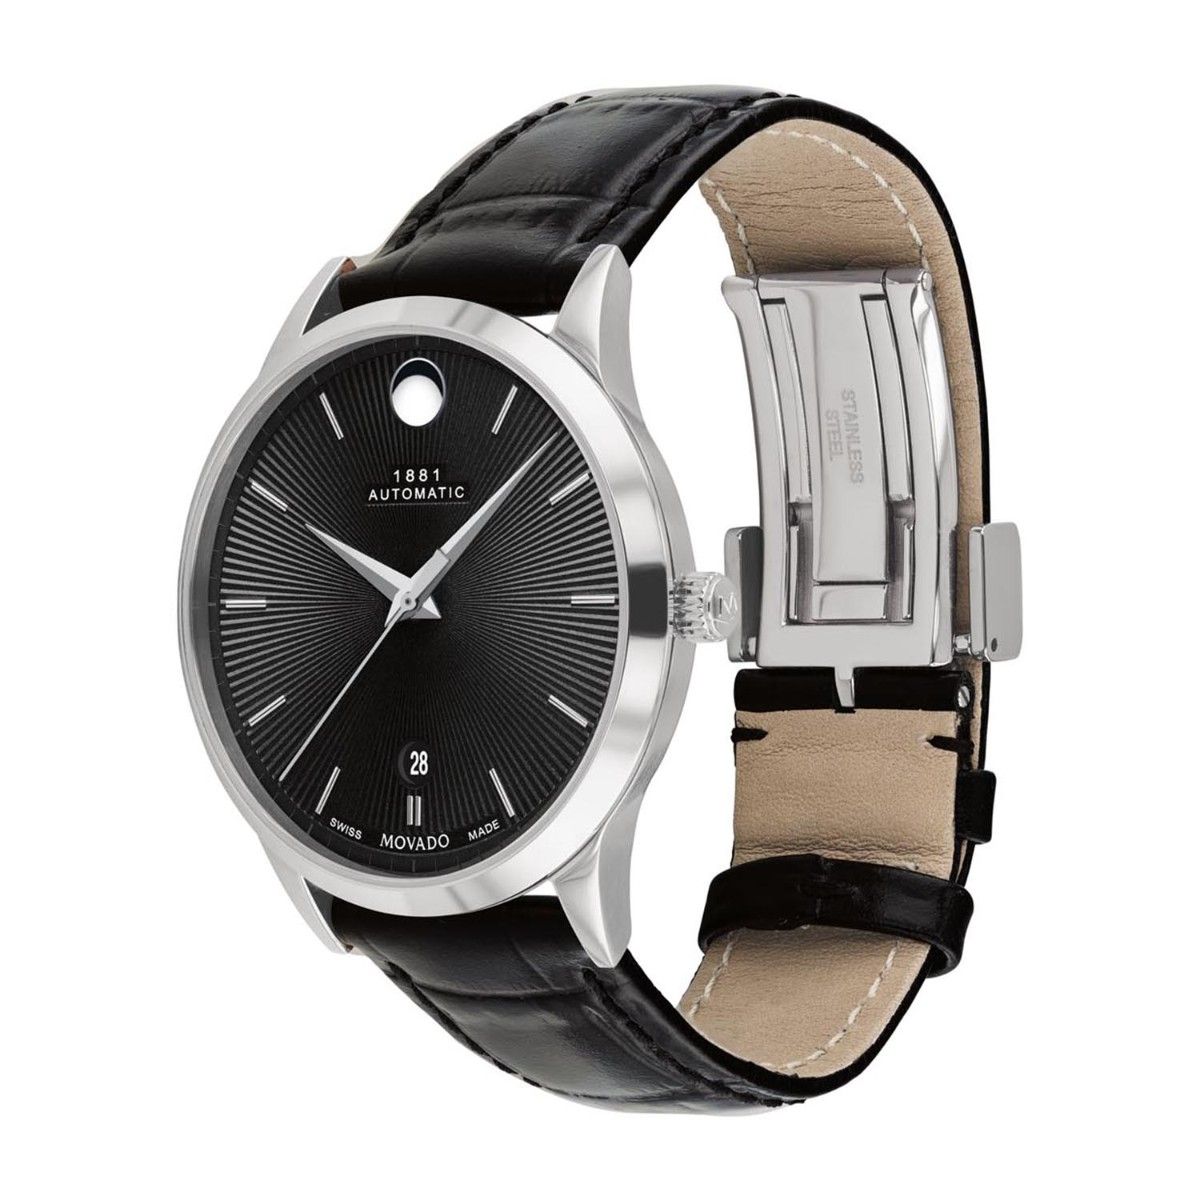 Buy Movado 1881 Automatic Black Round Dial Men Watch - 0607458 (M) Online